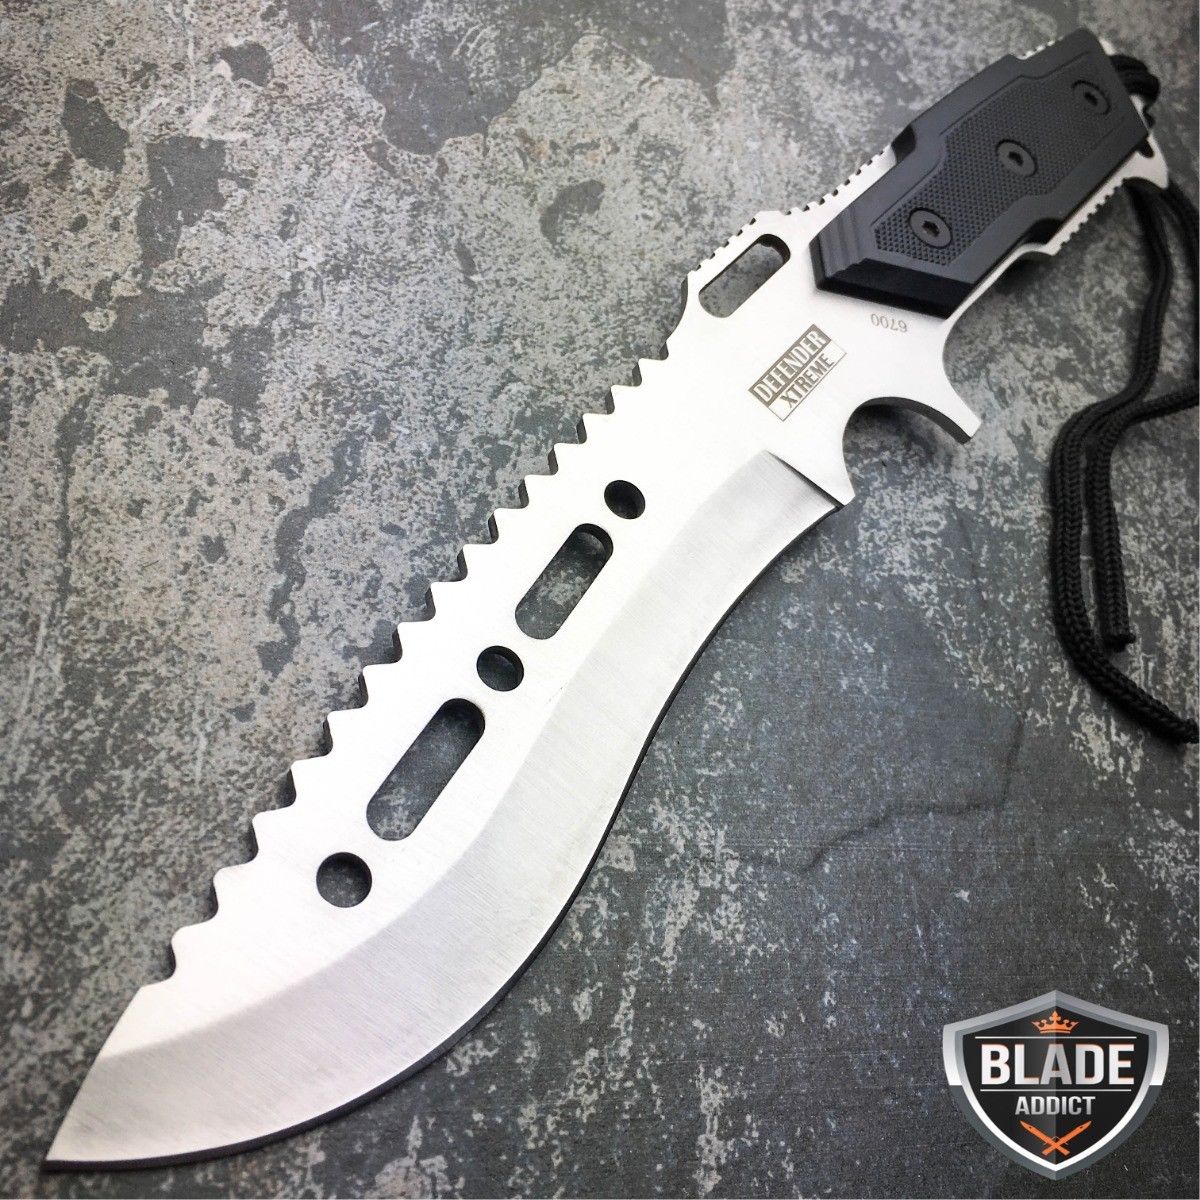 12″ SILVER Fixed Blade Tactical Combat Hunting Survival Knife w/ Sheath Bowie Outdoor